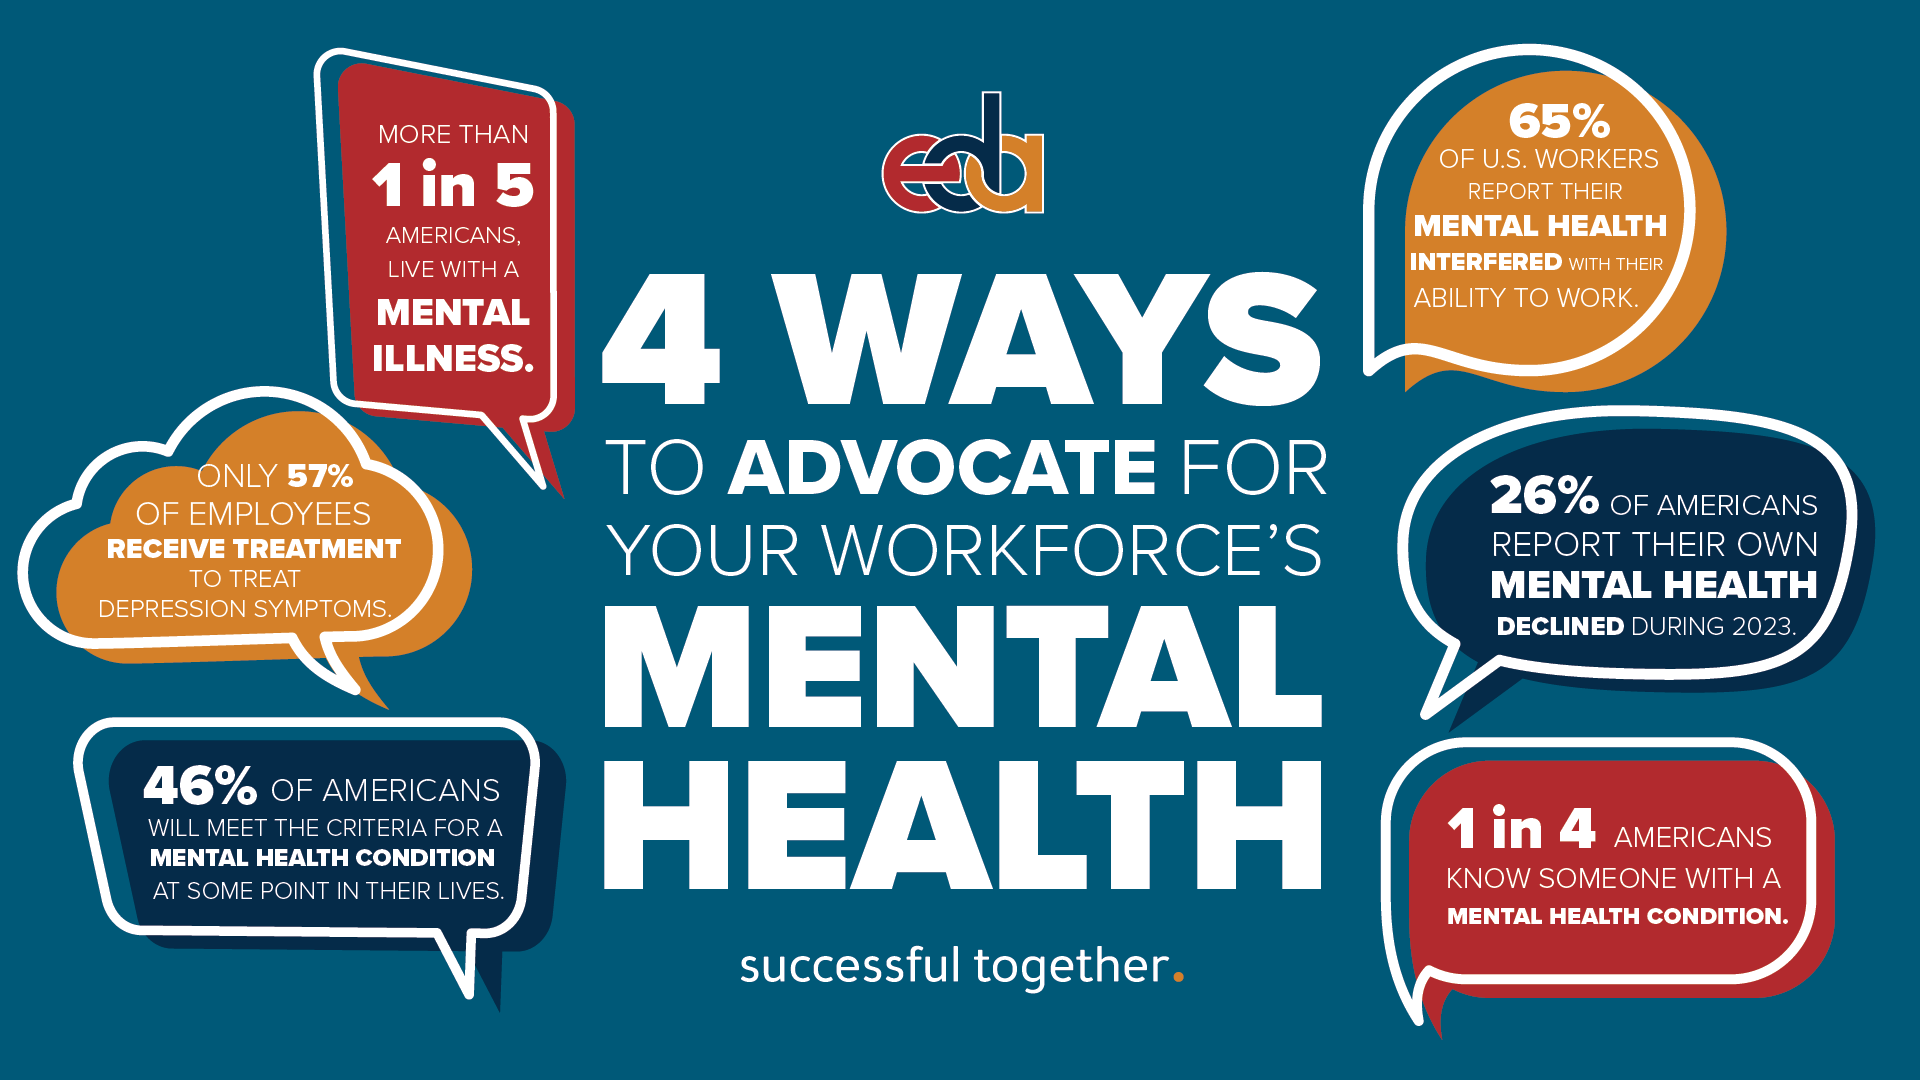 4-ways-to-advocate-for-your-workforces-mental-health-1920x1080